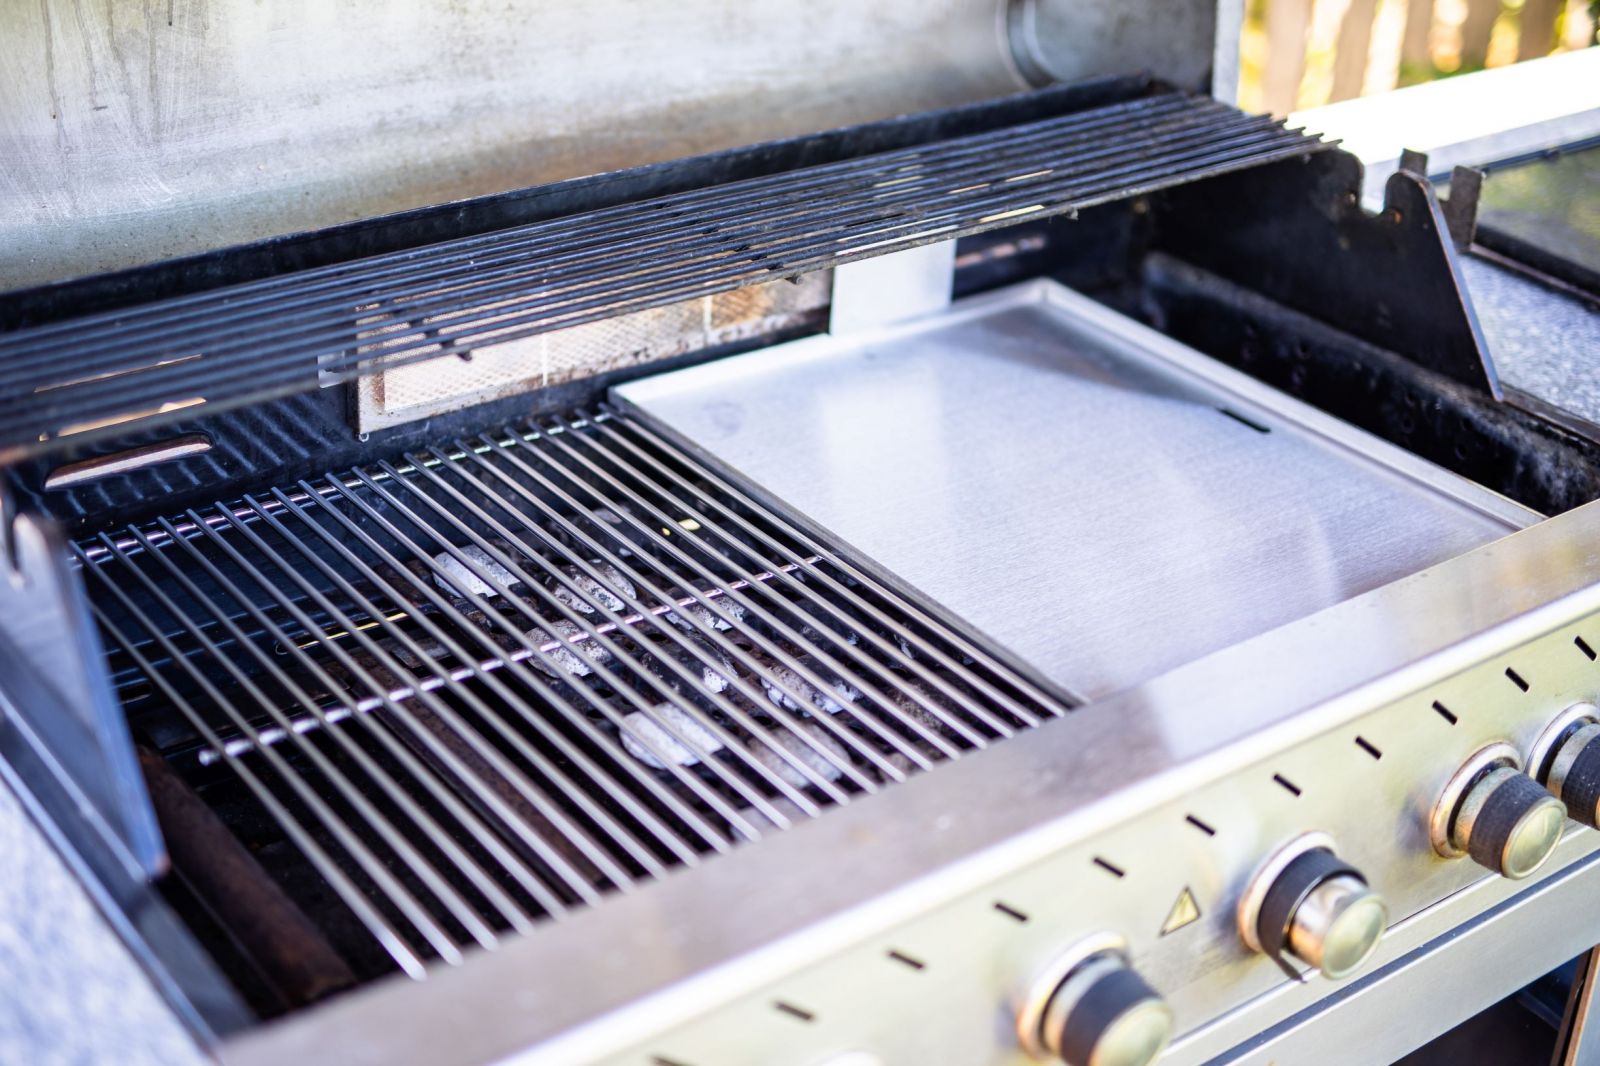 This is an image of a new Stainless_steel_ hotplate_grill in a bbq